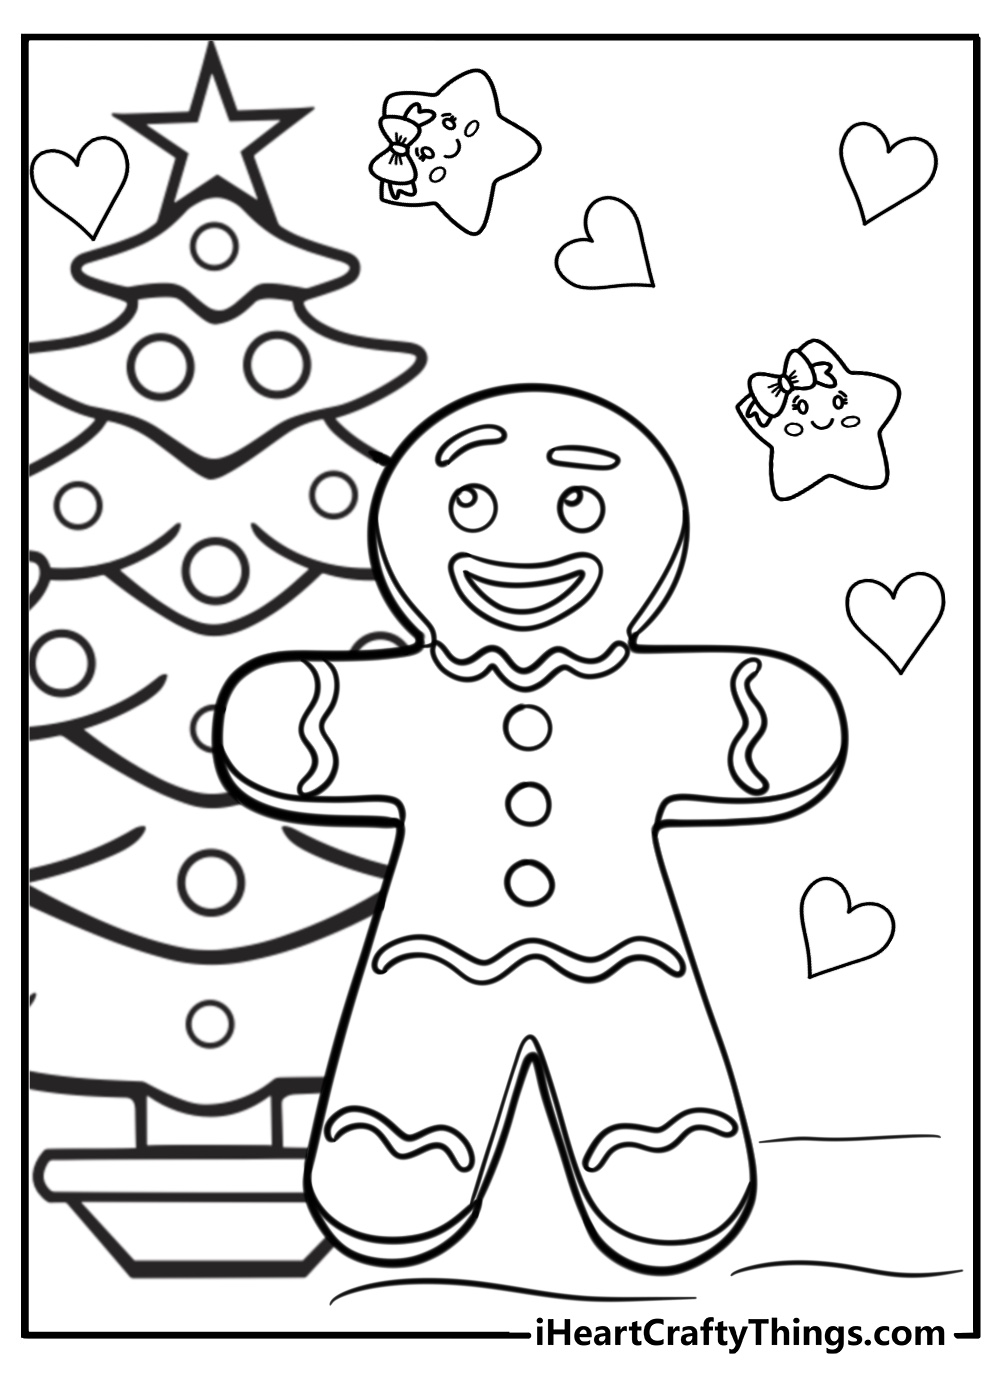 Gingerbread man coloring pages for christmas